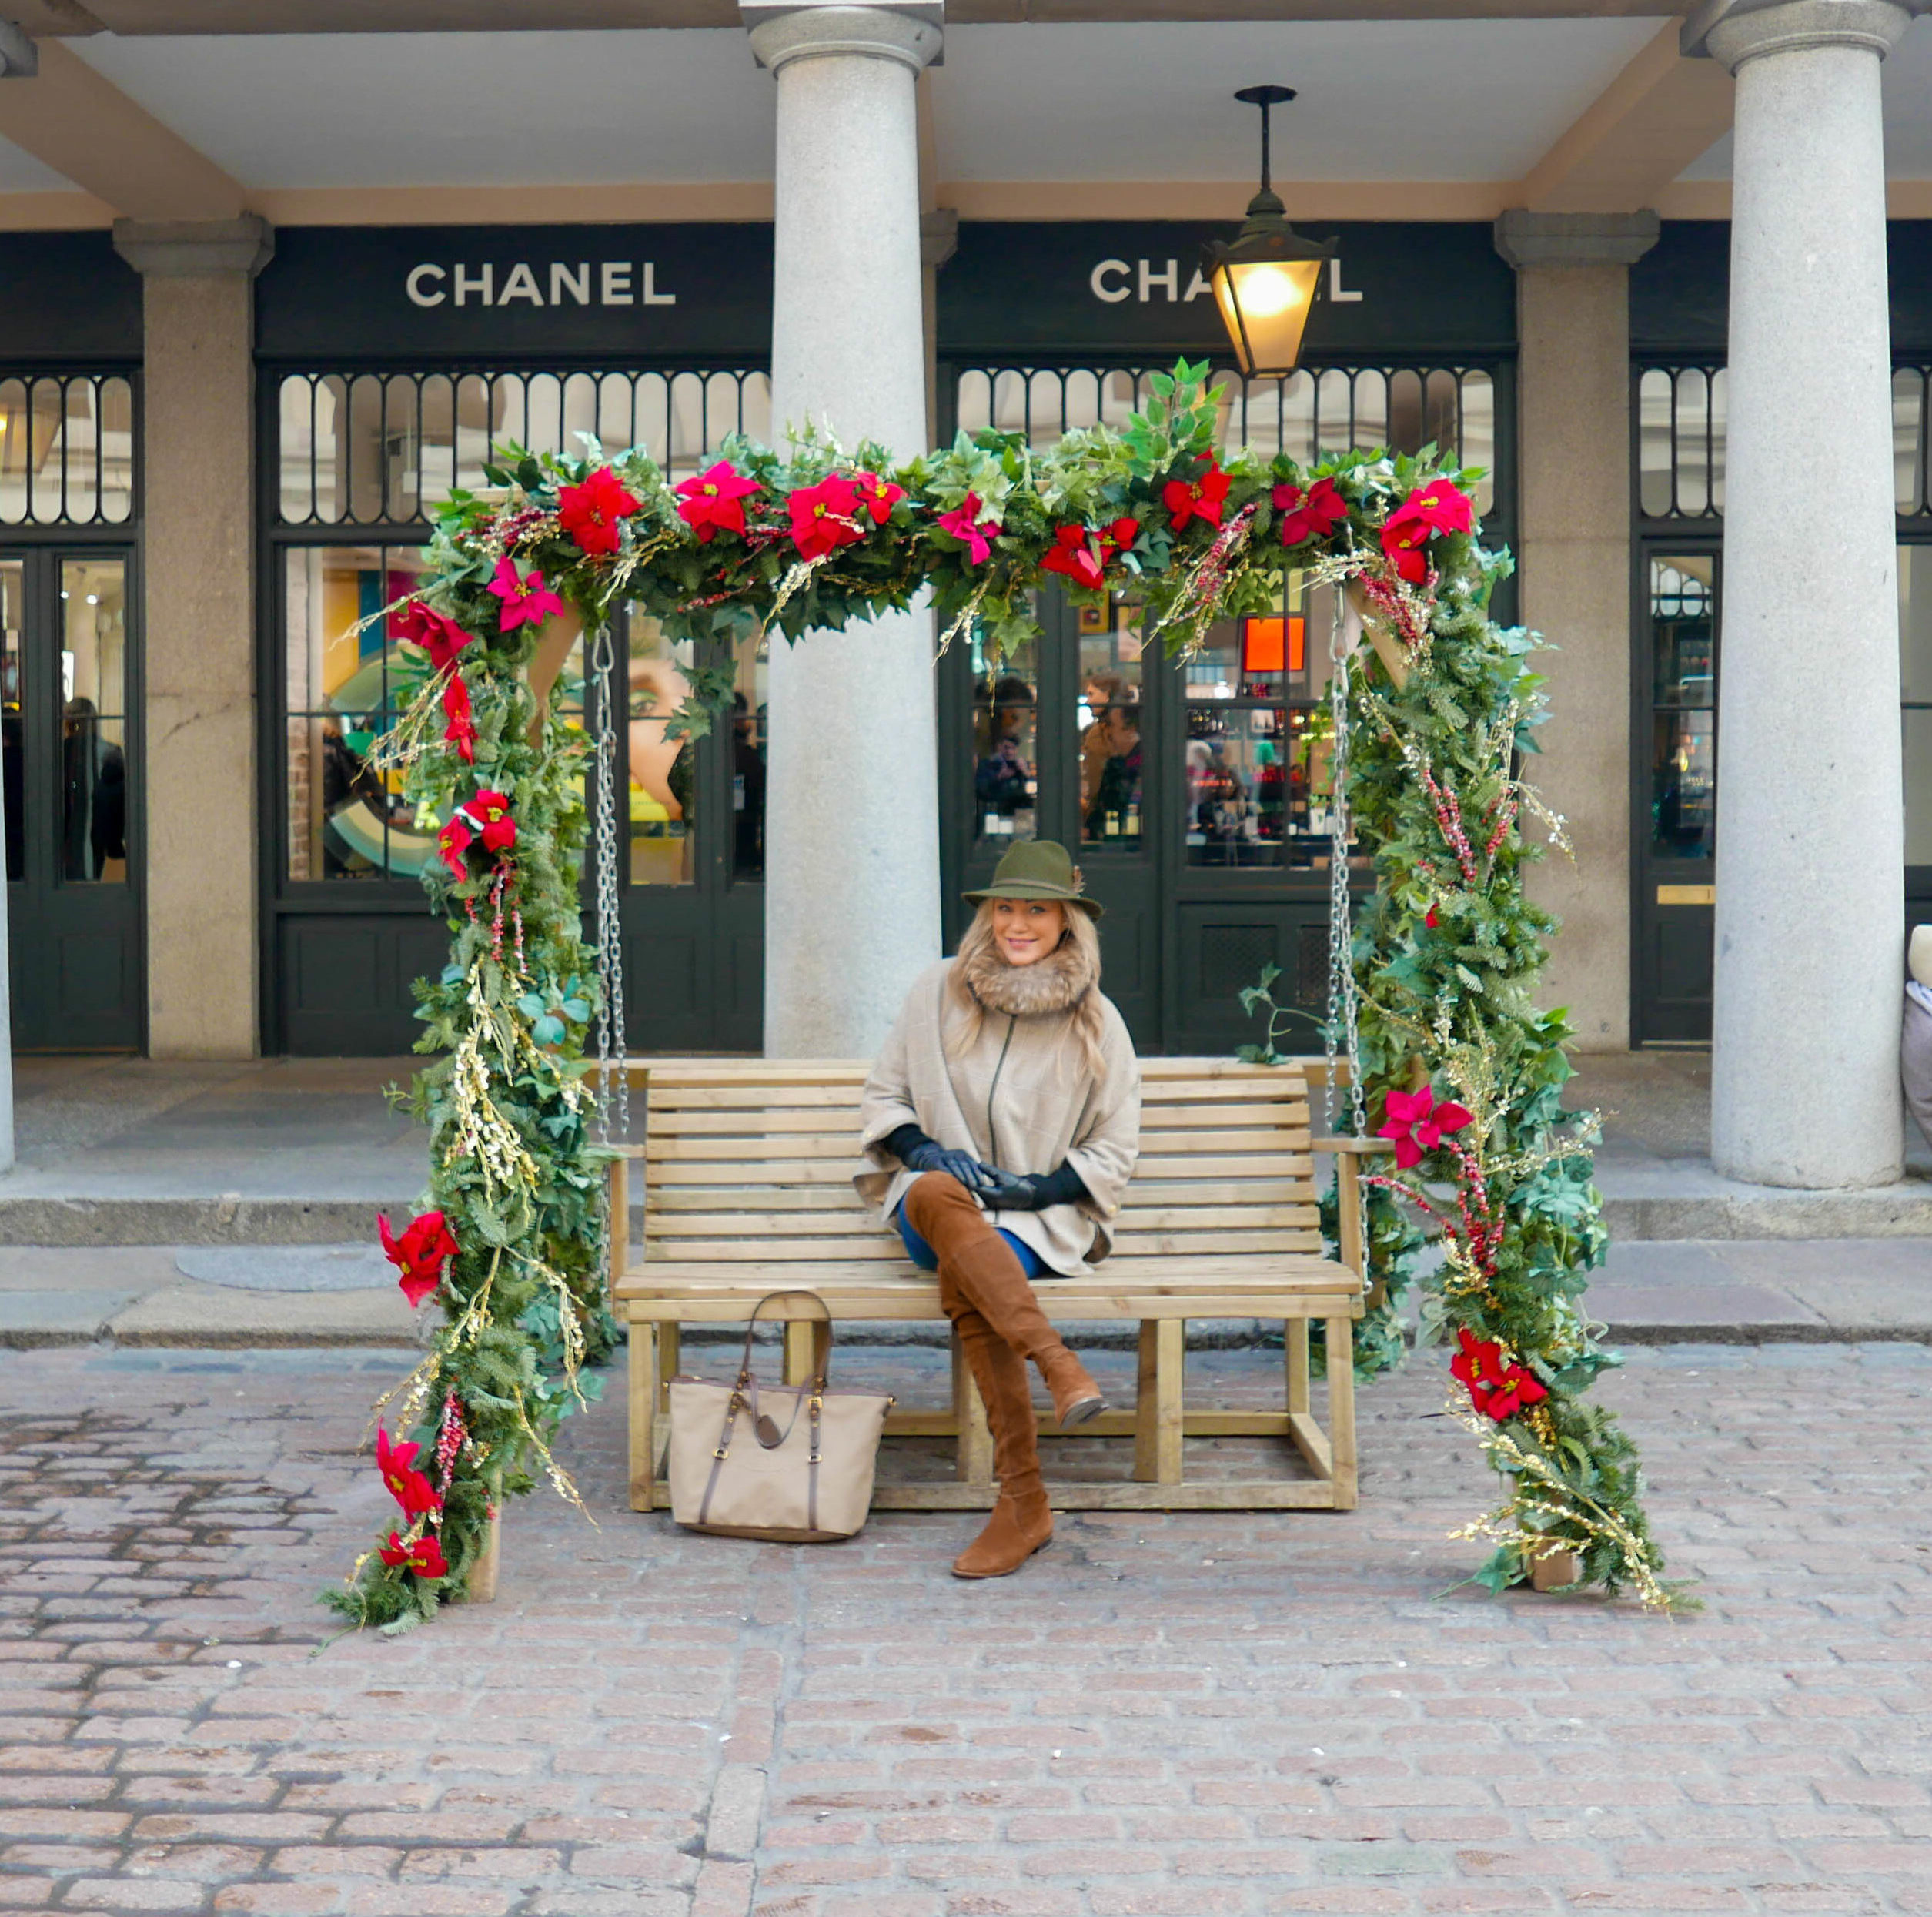 All you need to know about Covent Garden